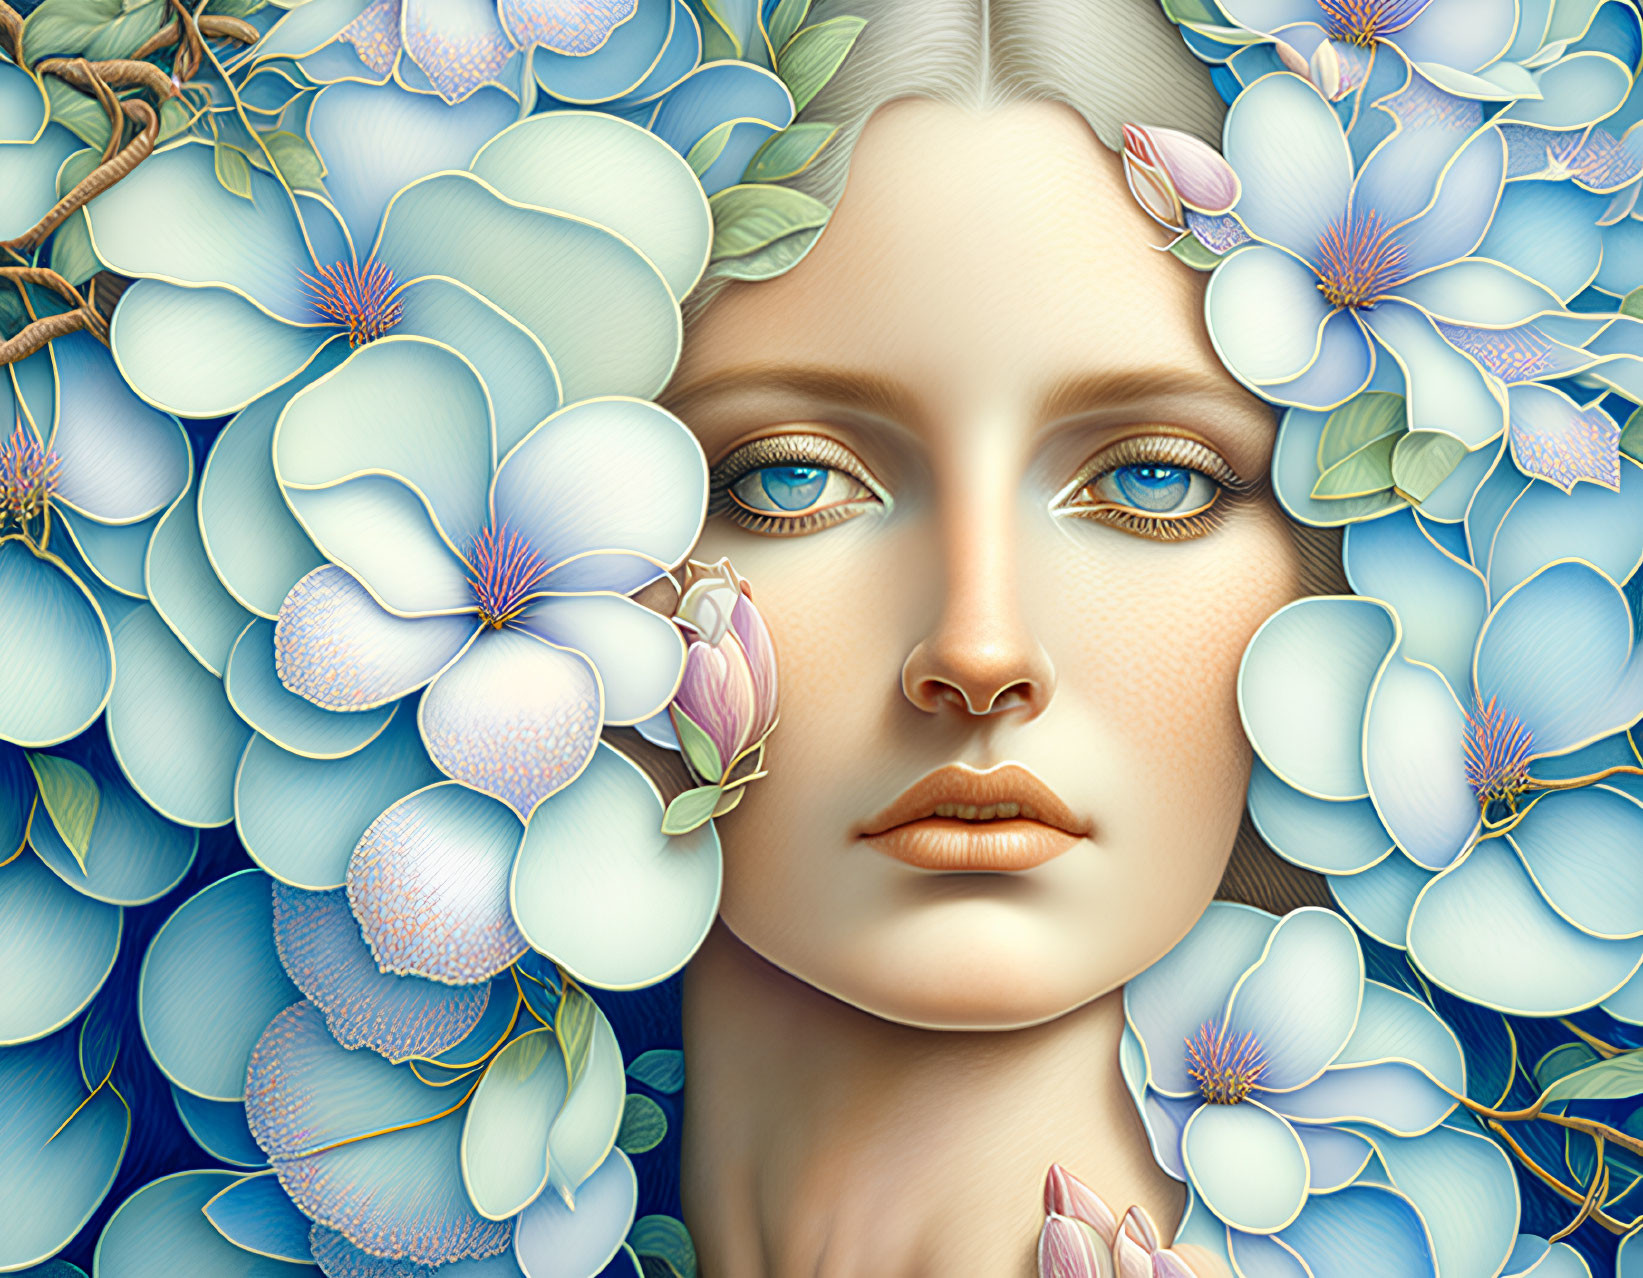 Surreal illustration: Woman's face in vibrant blue flower sea